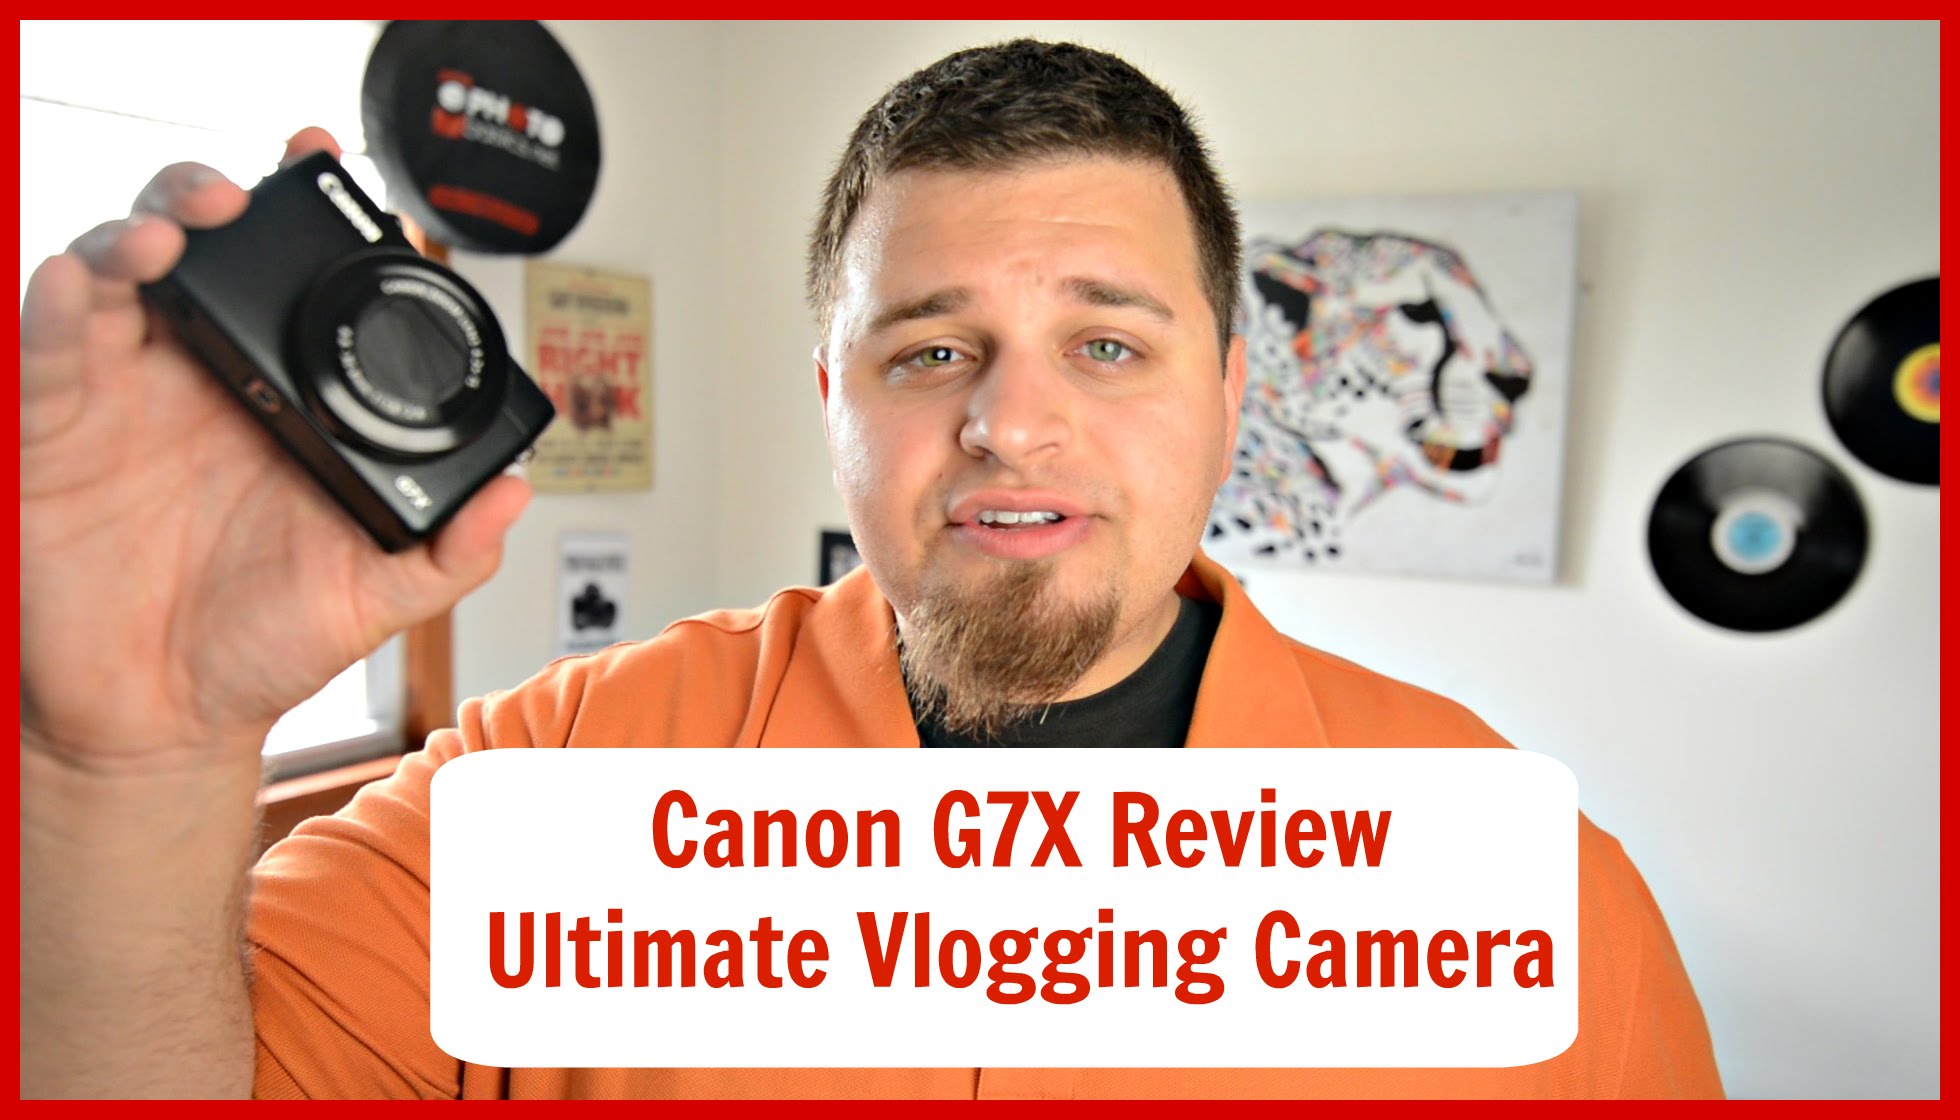 CANON G7X REVIEW: THE ULTIMATE VLOGGING CAMERA TO OWN